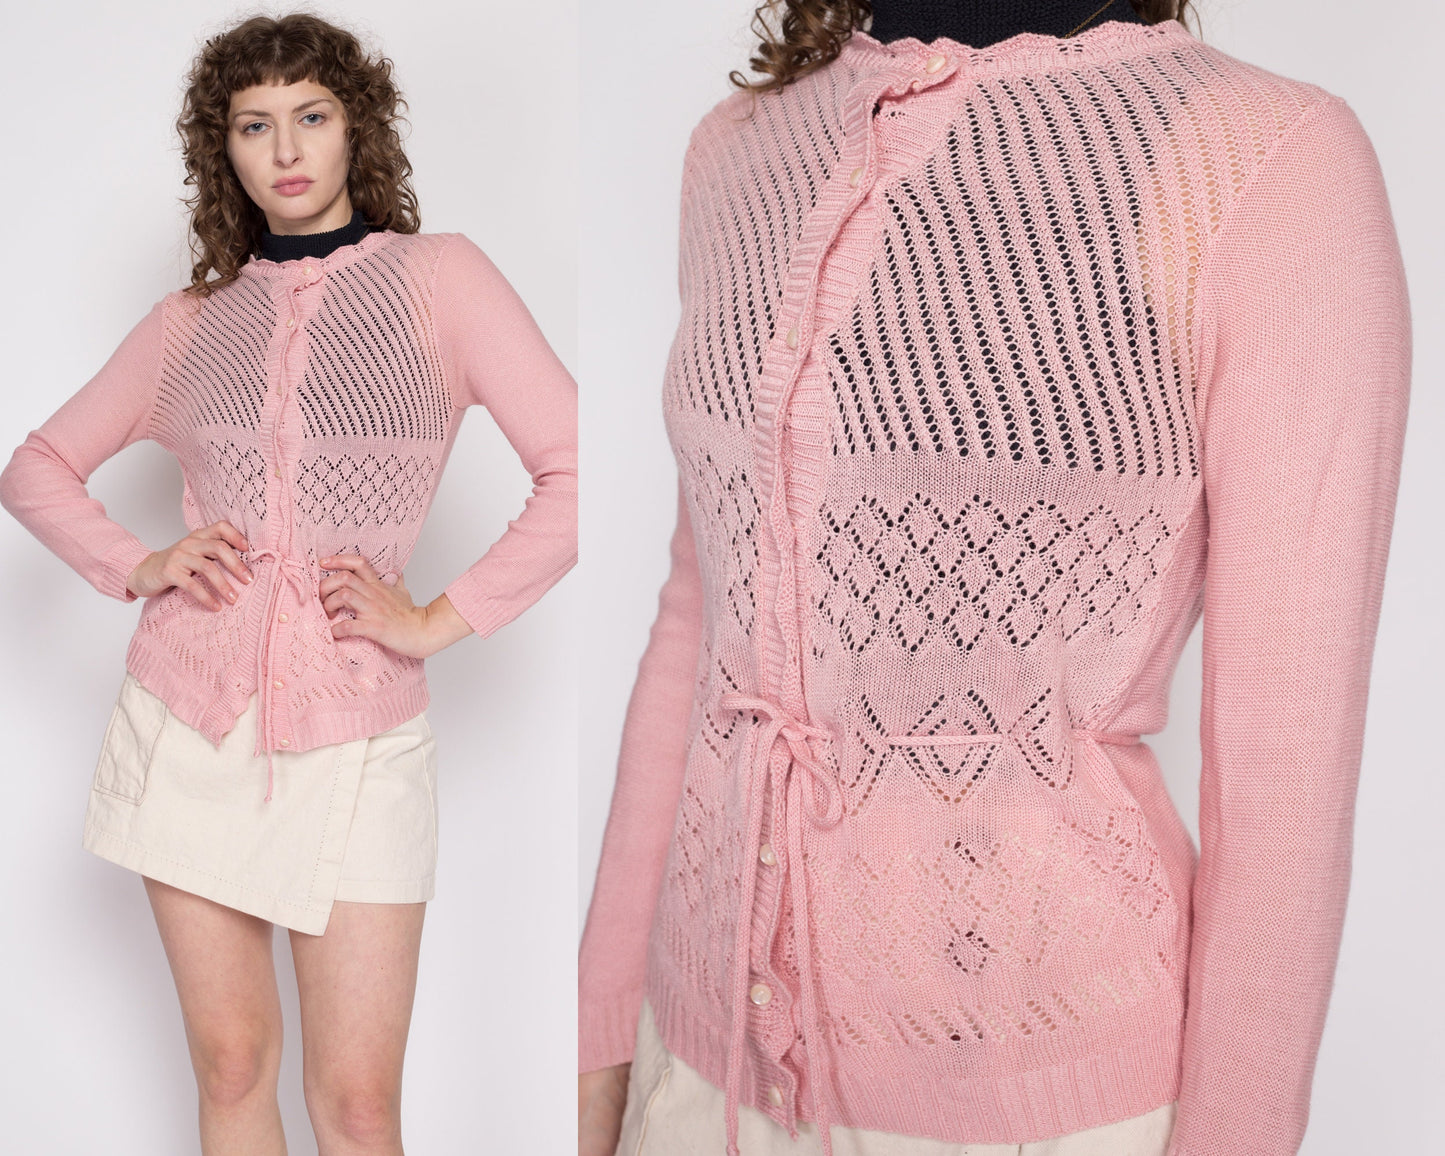 Small 70s Pink Eyelet Knit Sweater Top | Vintage Sheer Open Weave Fitted Drawstring Waist Long Sleeve Shirt